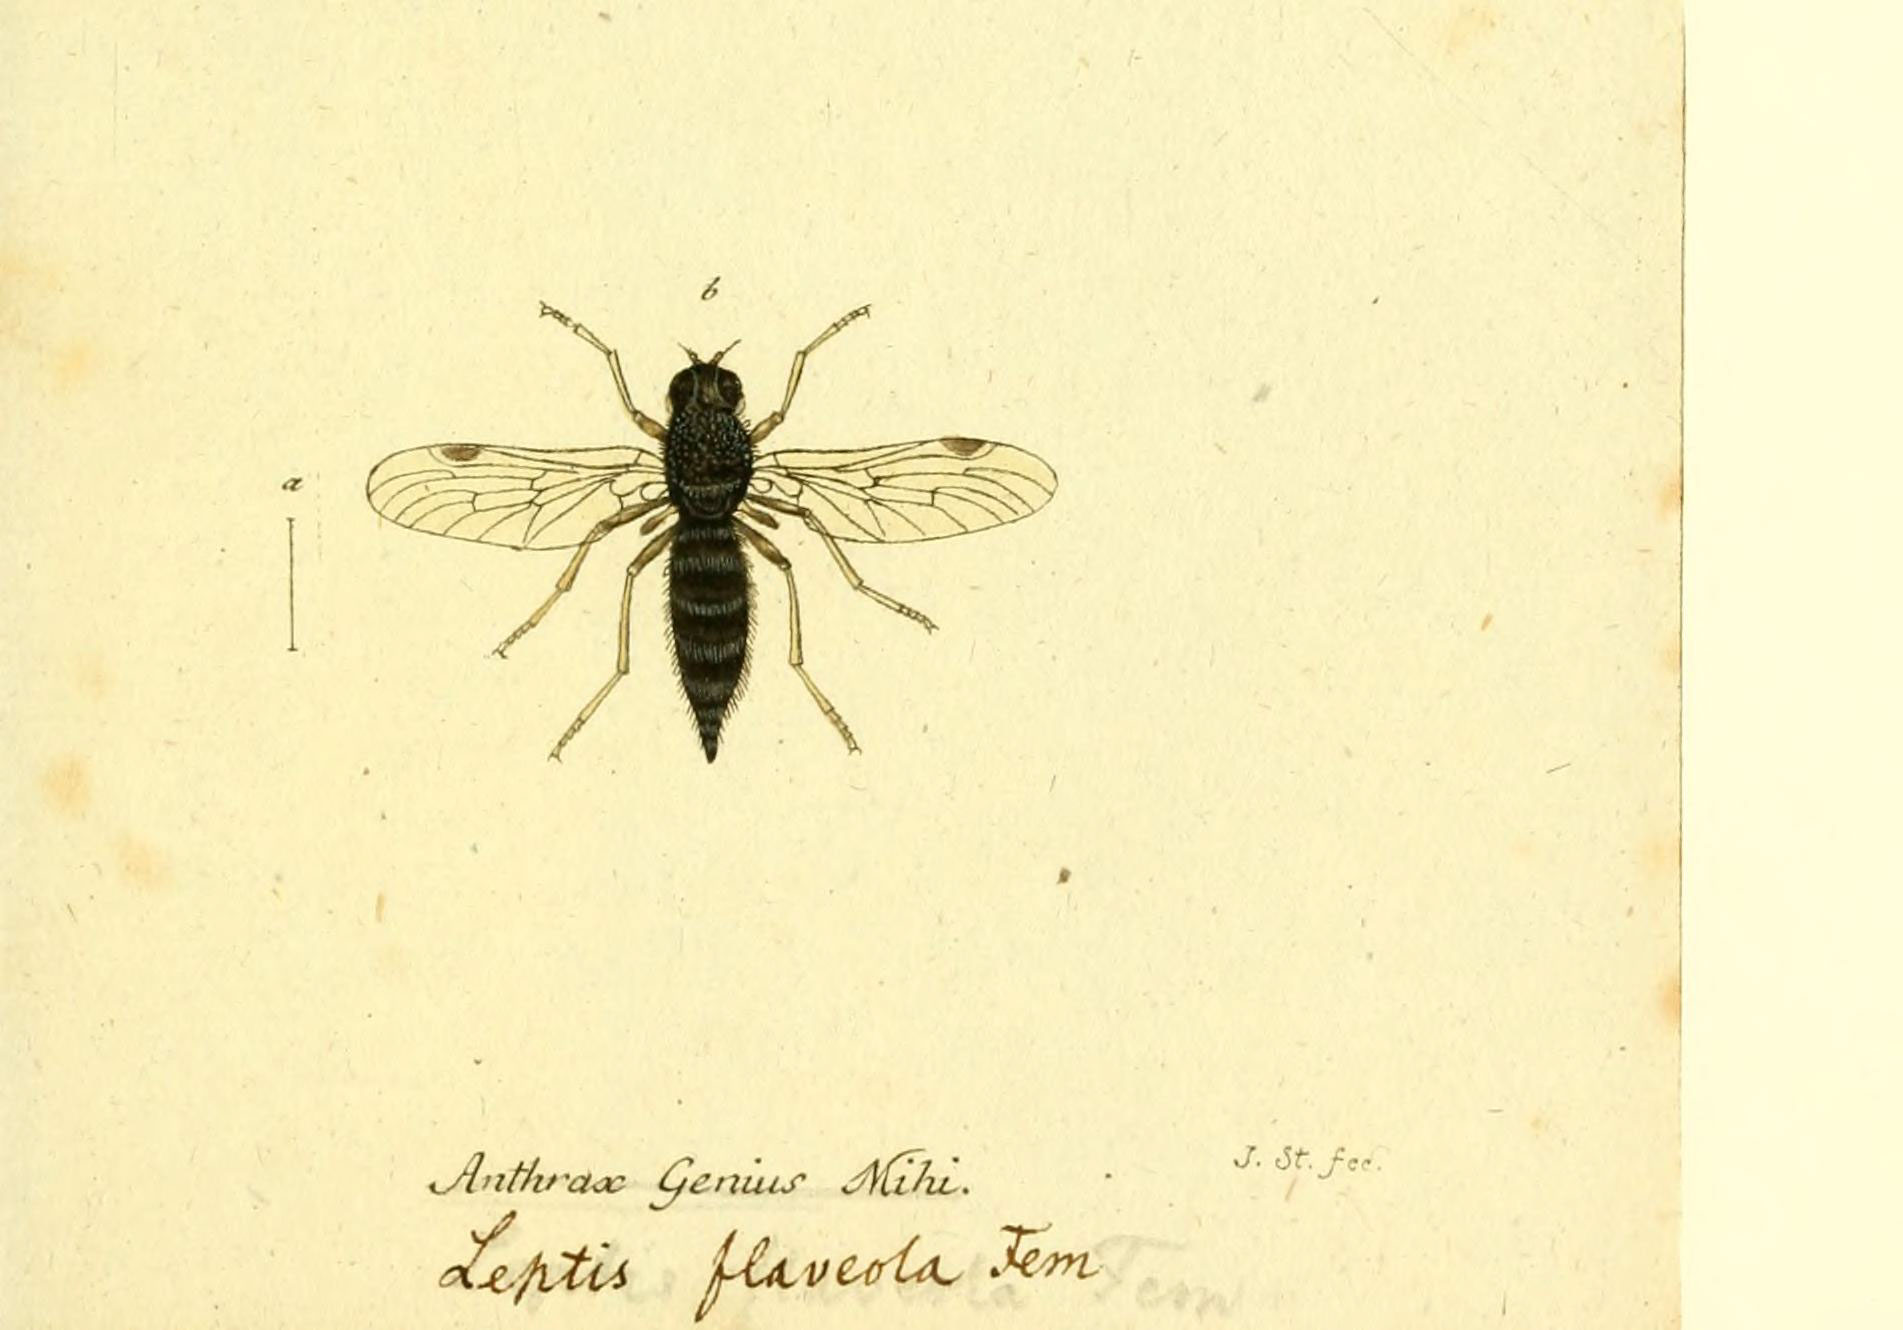 a drawing shows a bee with long wings and antennae